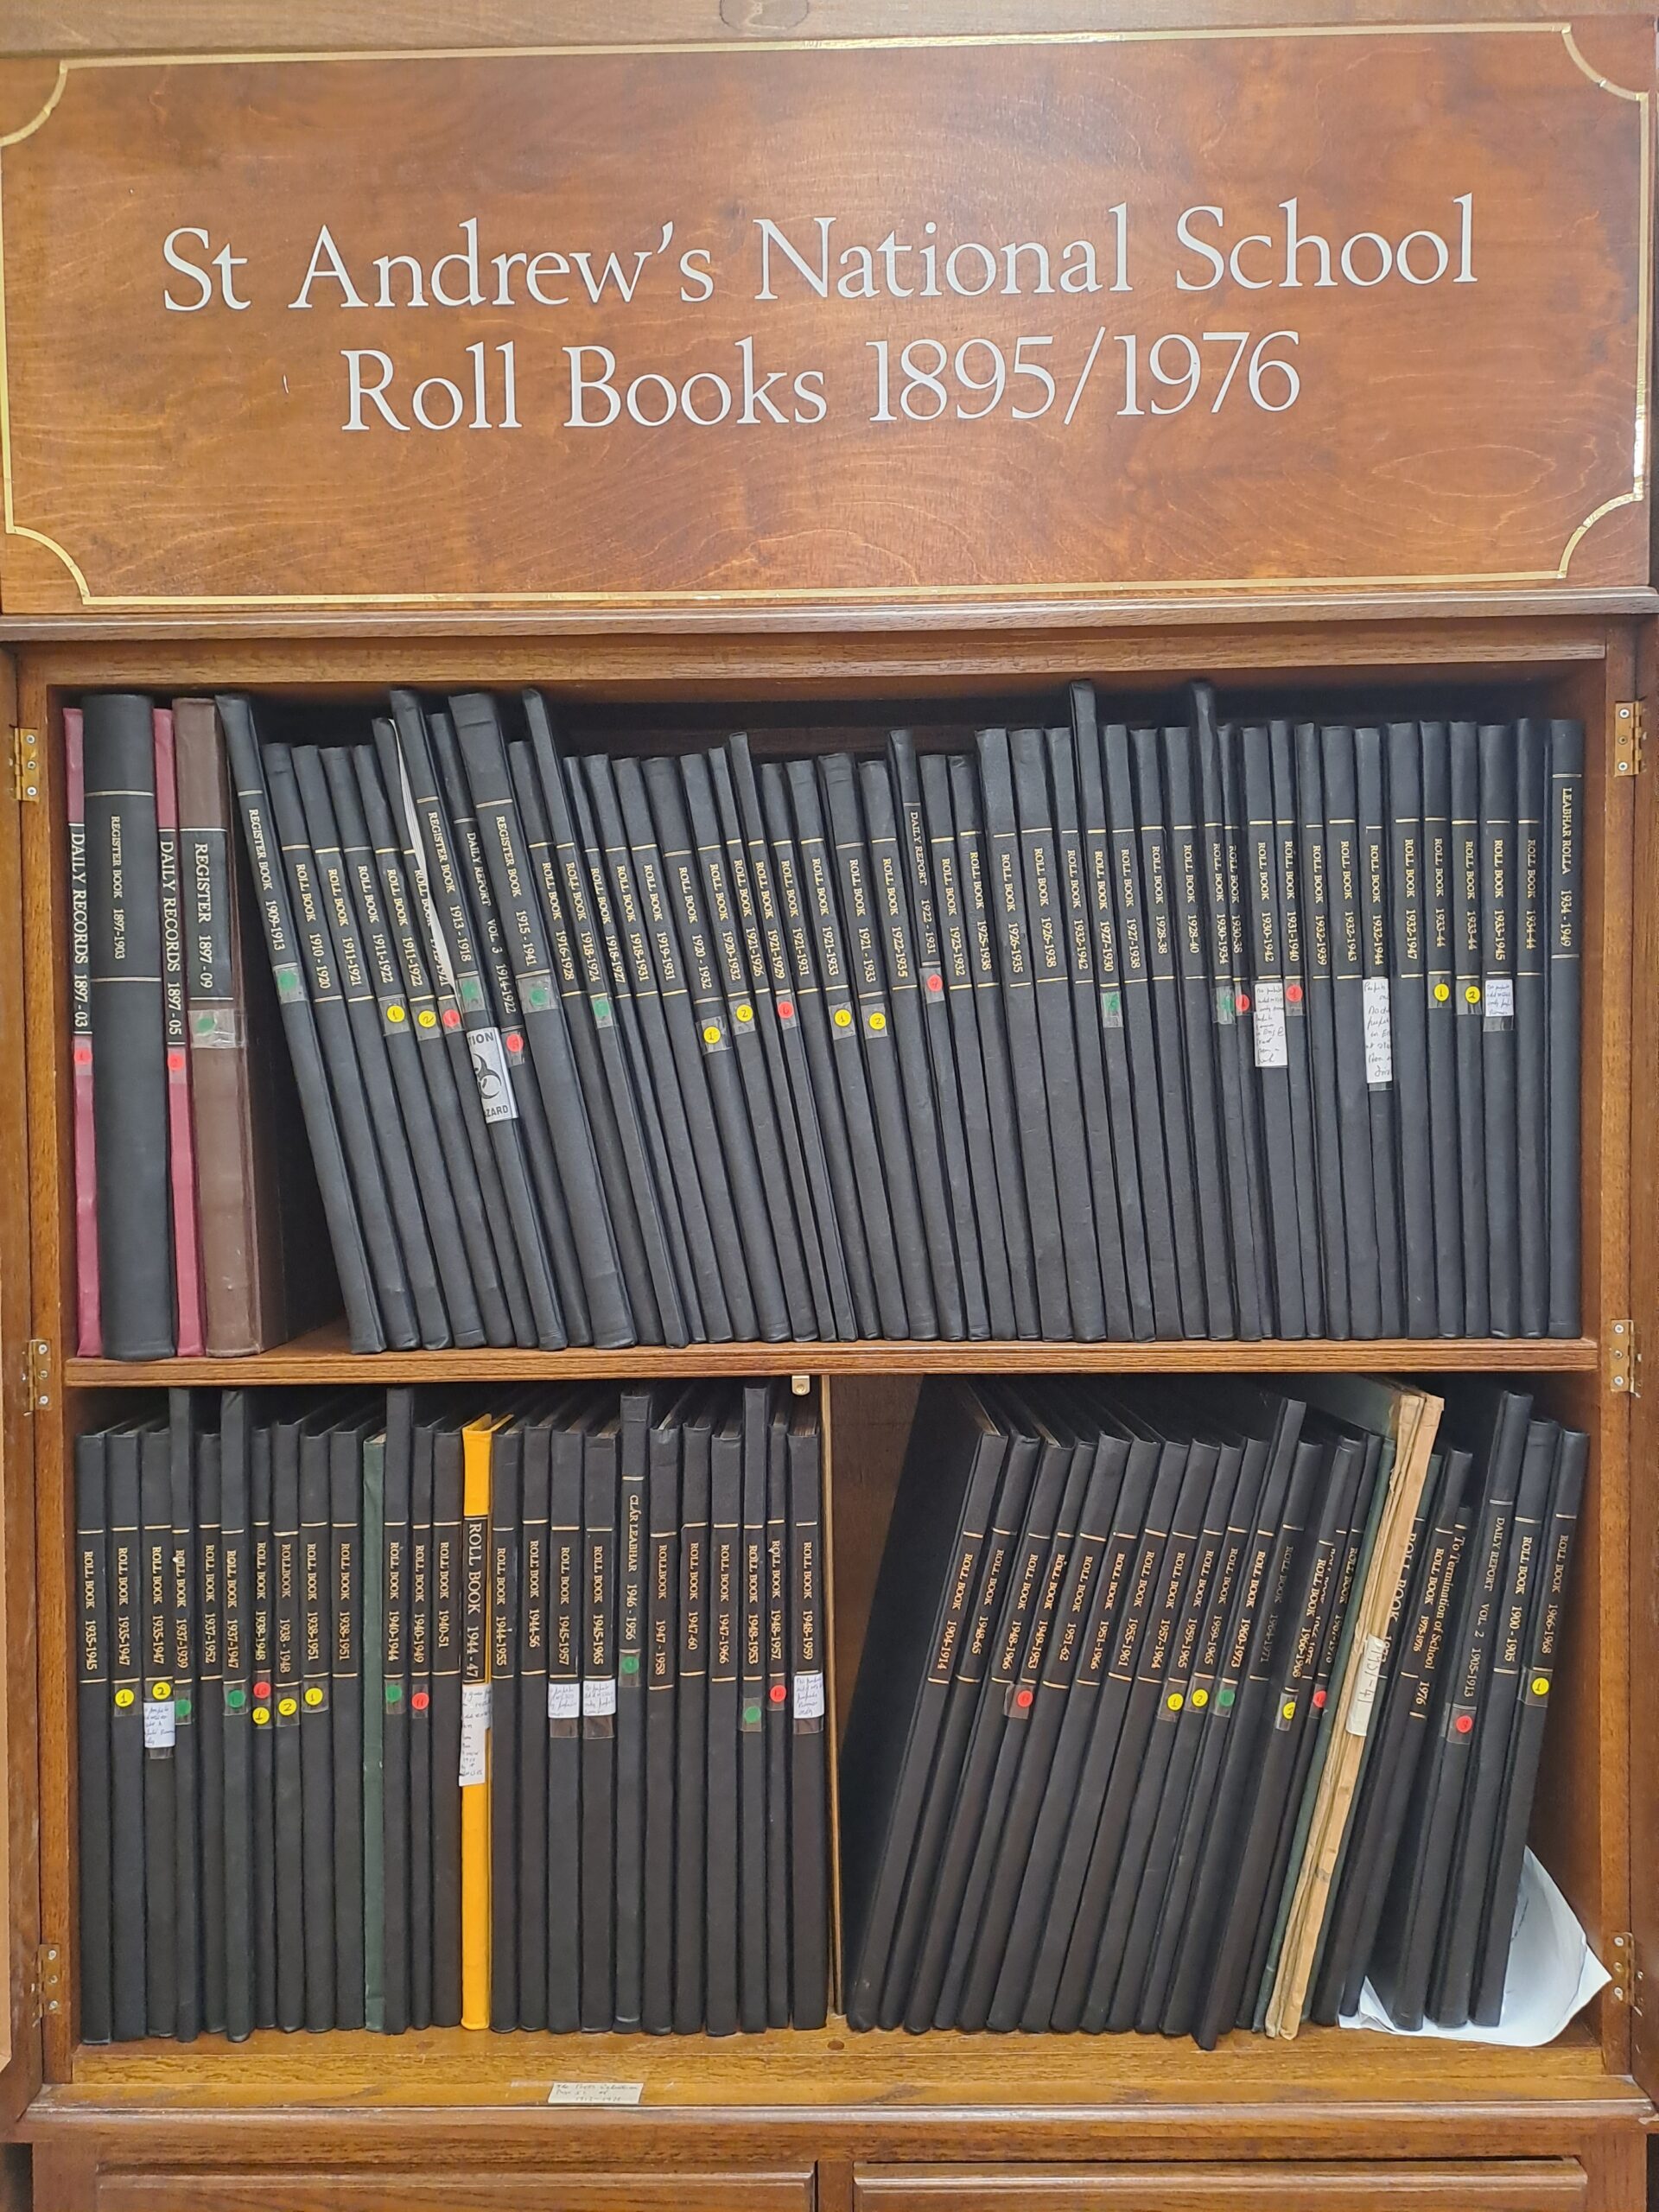 Wooden book shelf with set of Roll books from 1895-1976